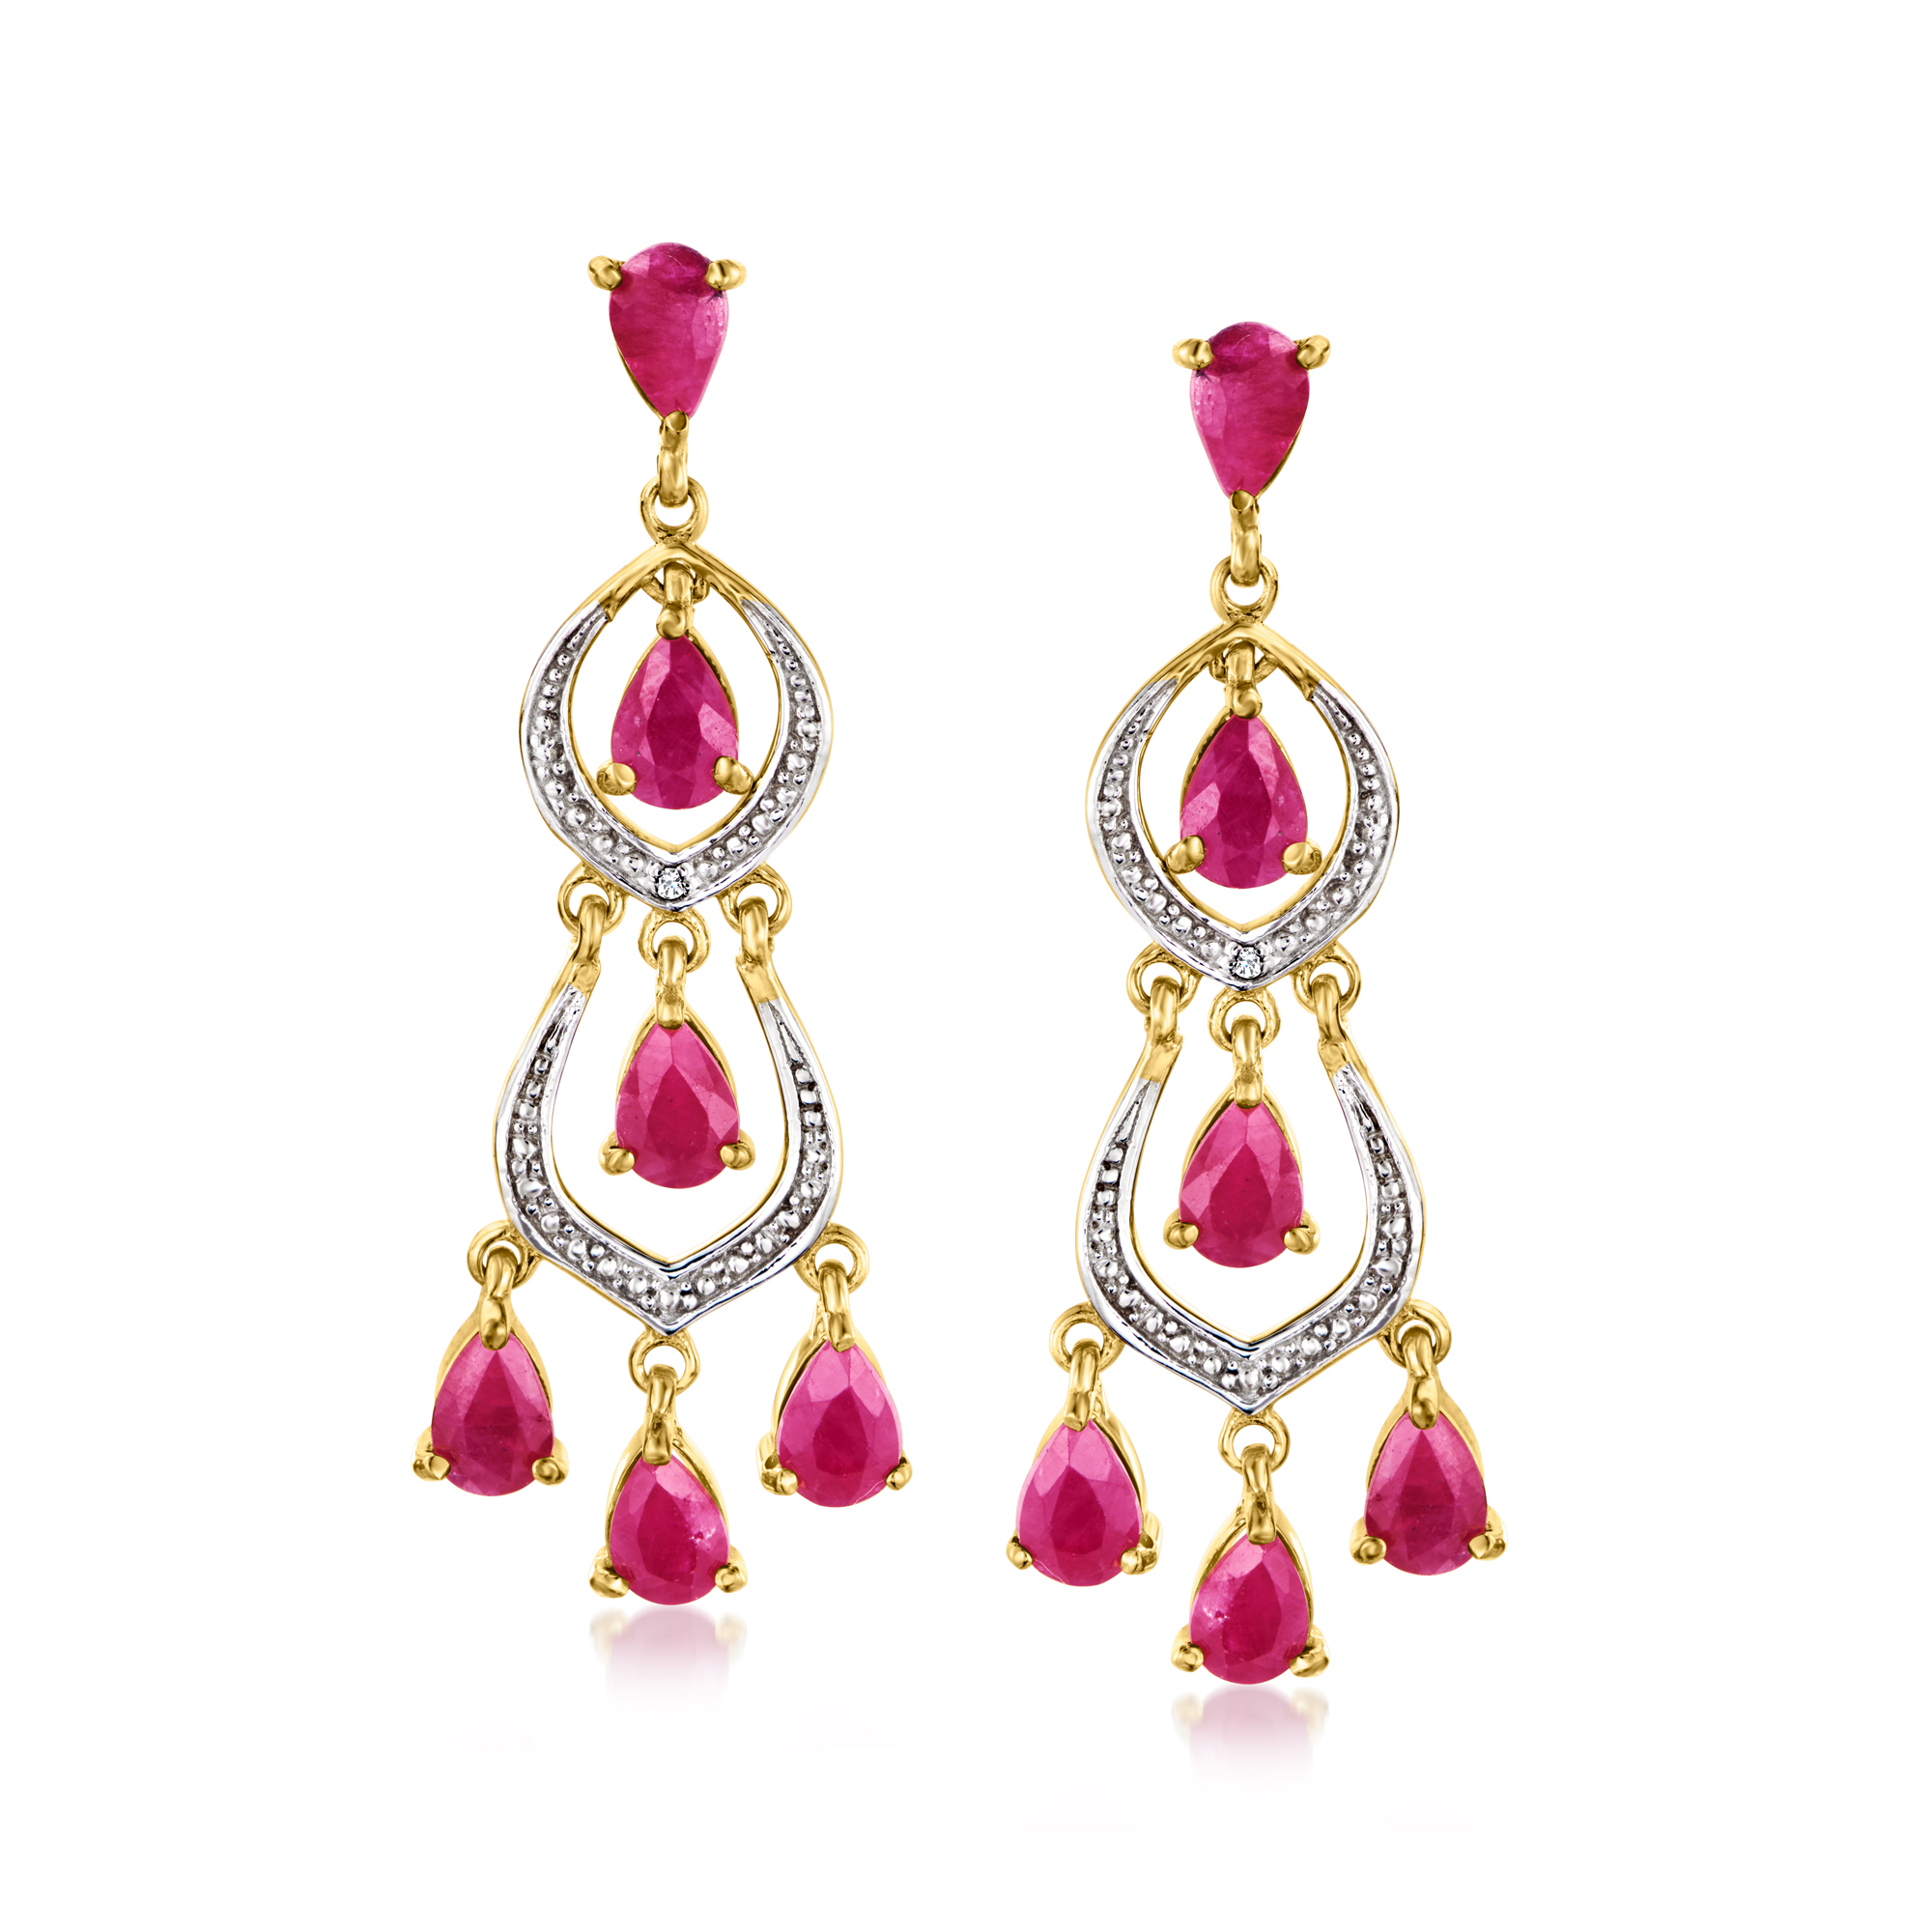 4.80 ct. Ruby Chandelier Earrings with Diamond Accents in 18kt Gold  Over Sterling Ross-Simons